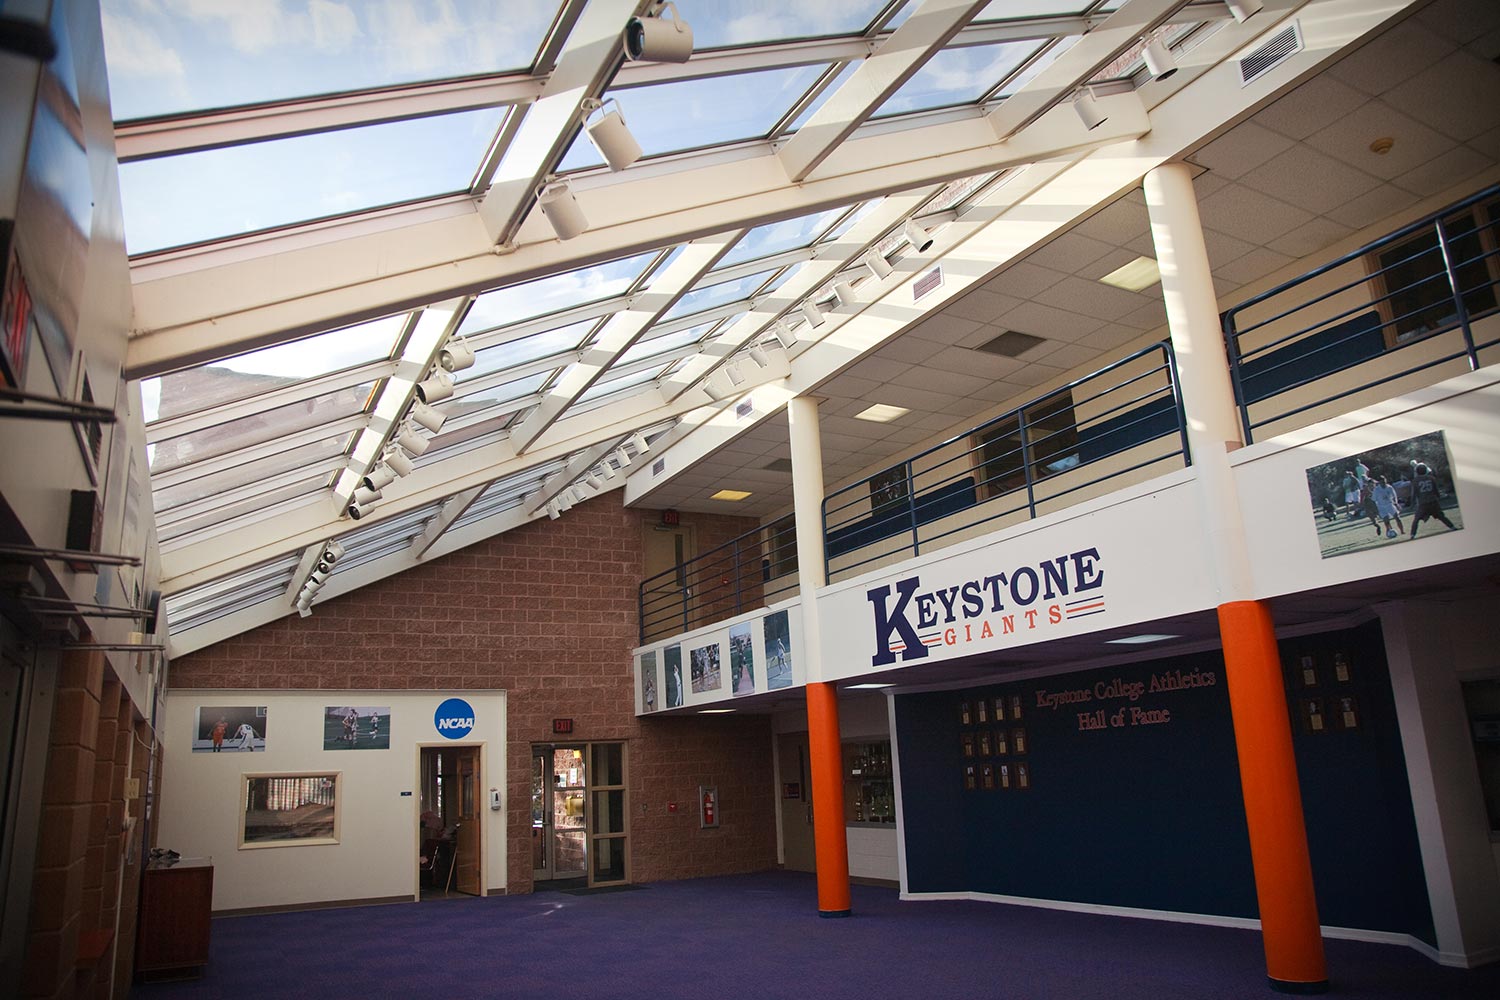 Keystone Giants foyer with glass ceiling and catwalk